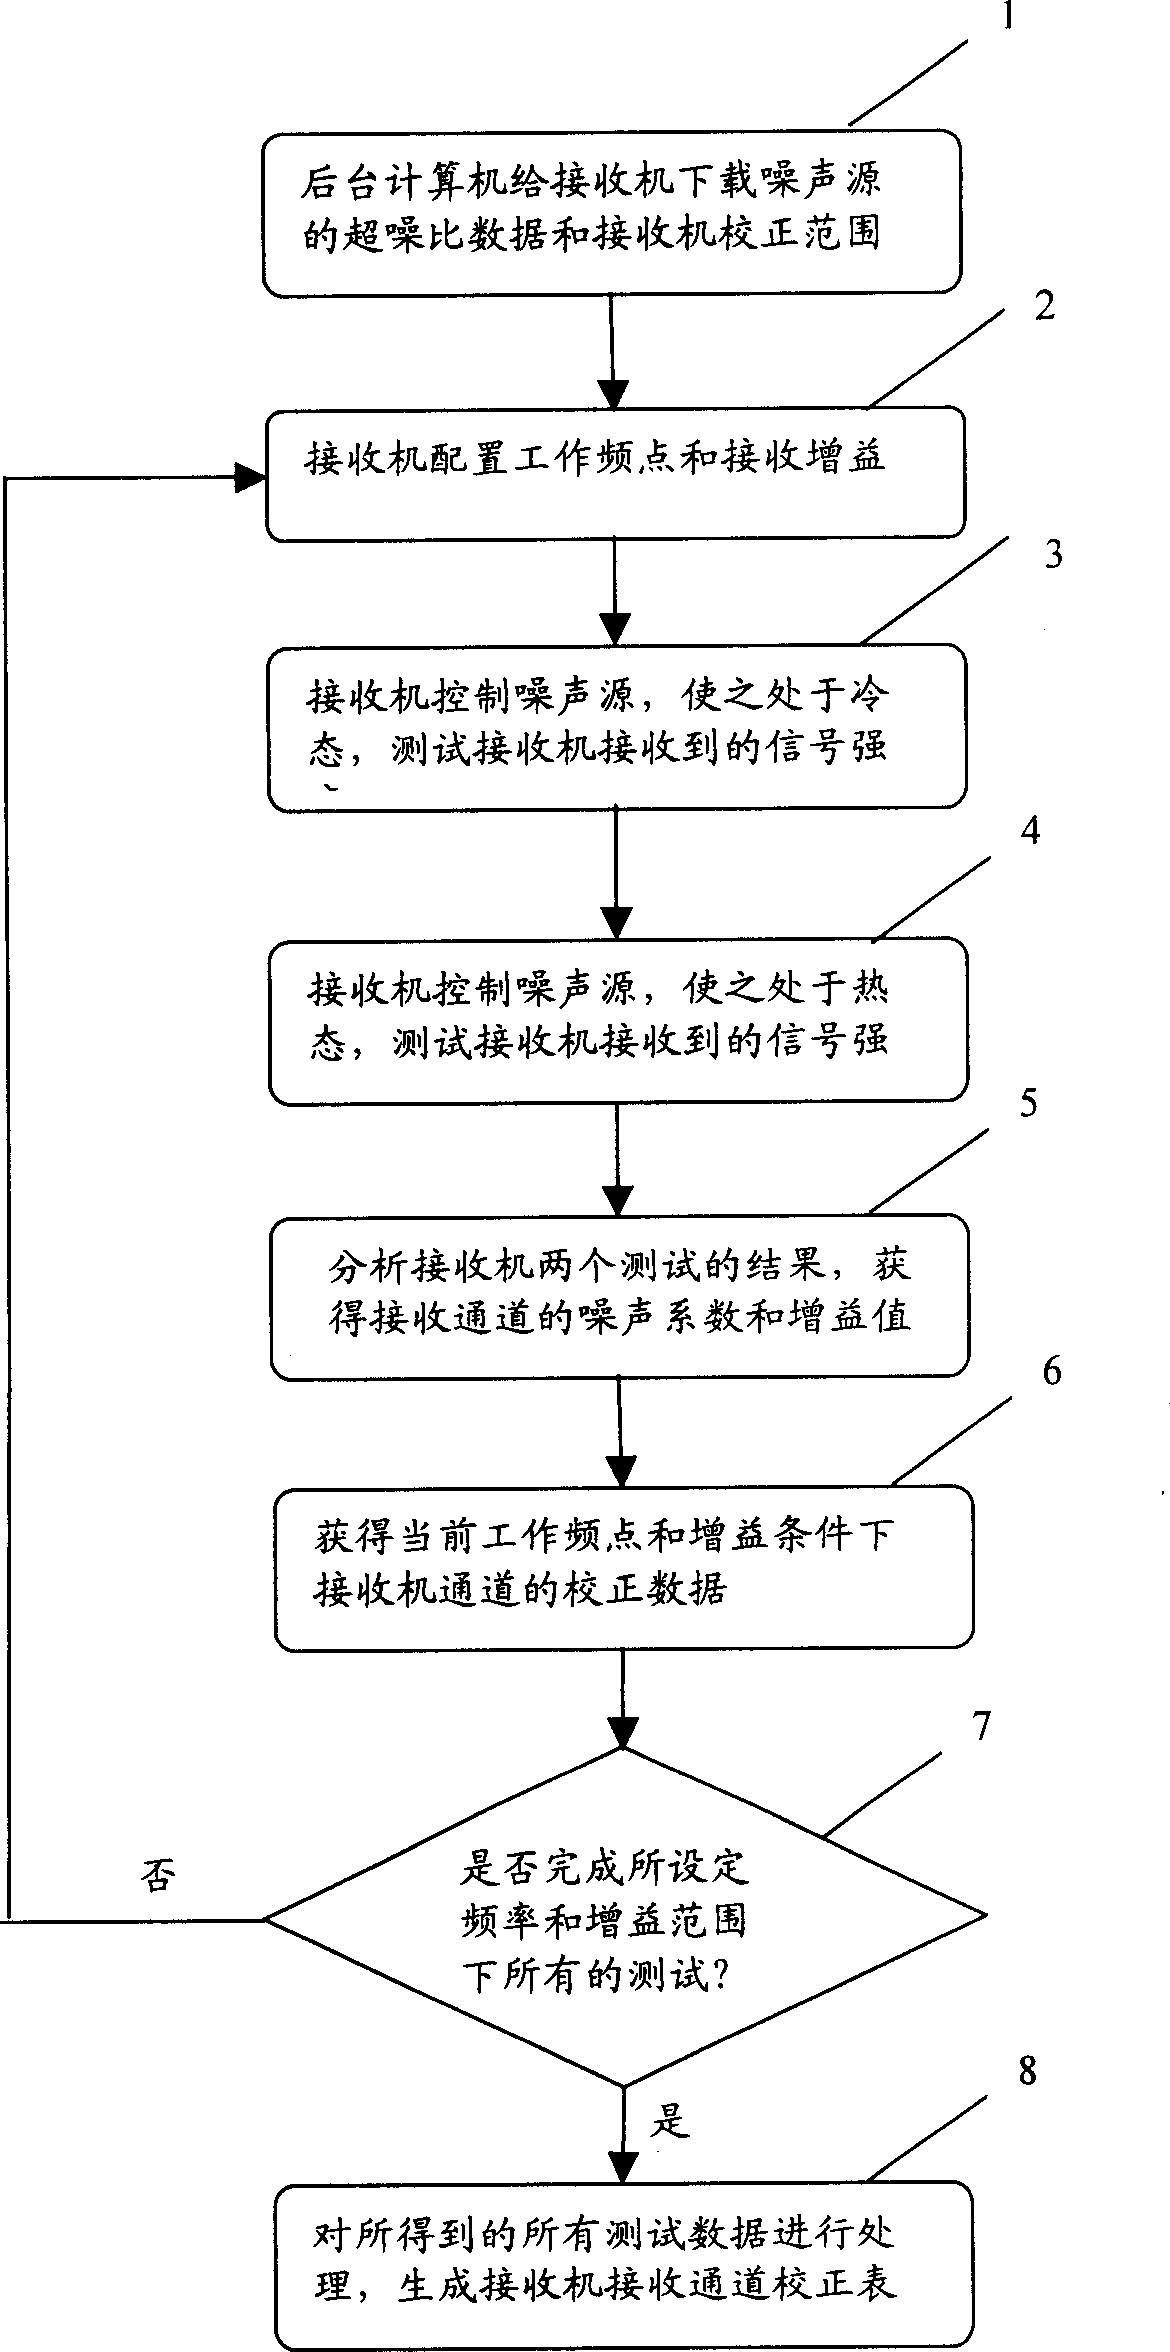 Apparatus and method of obtaining correction coefficient of receiver